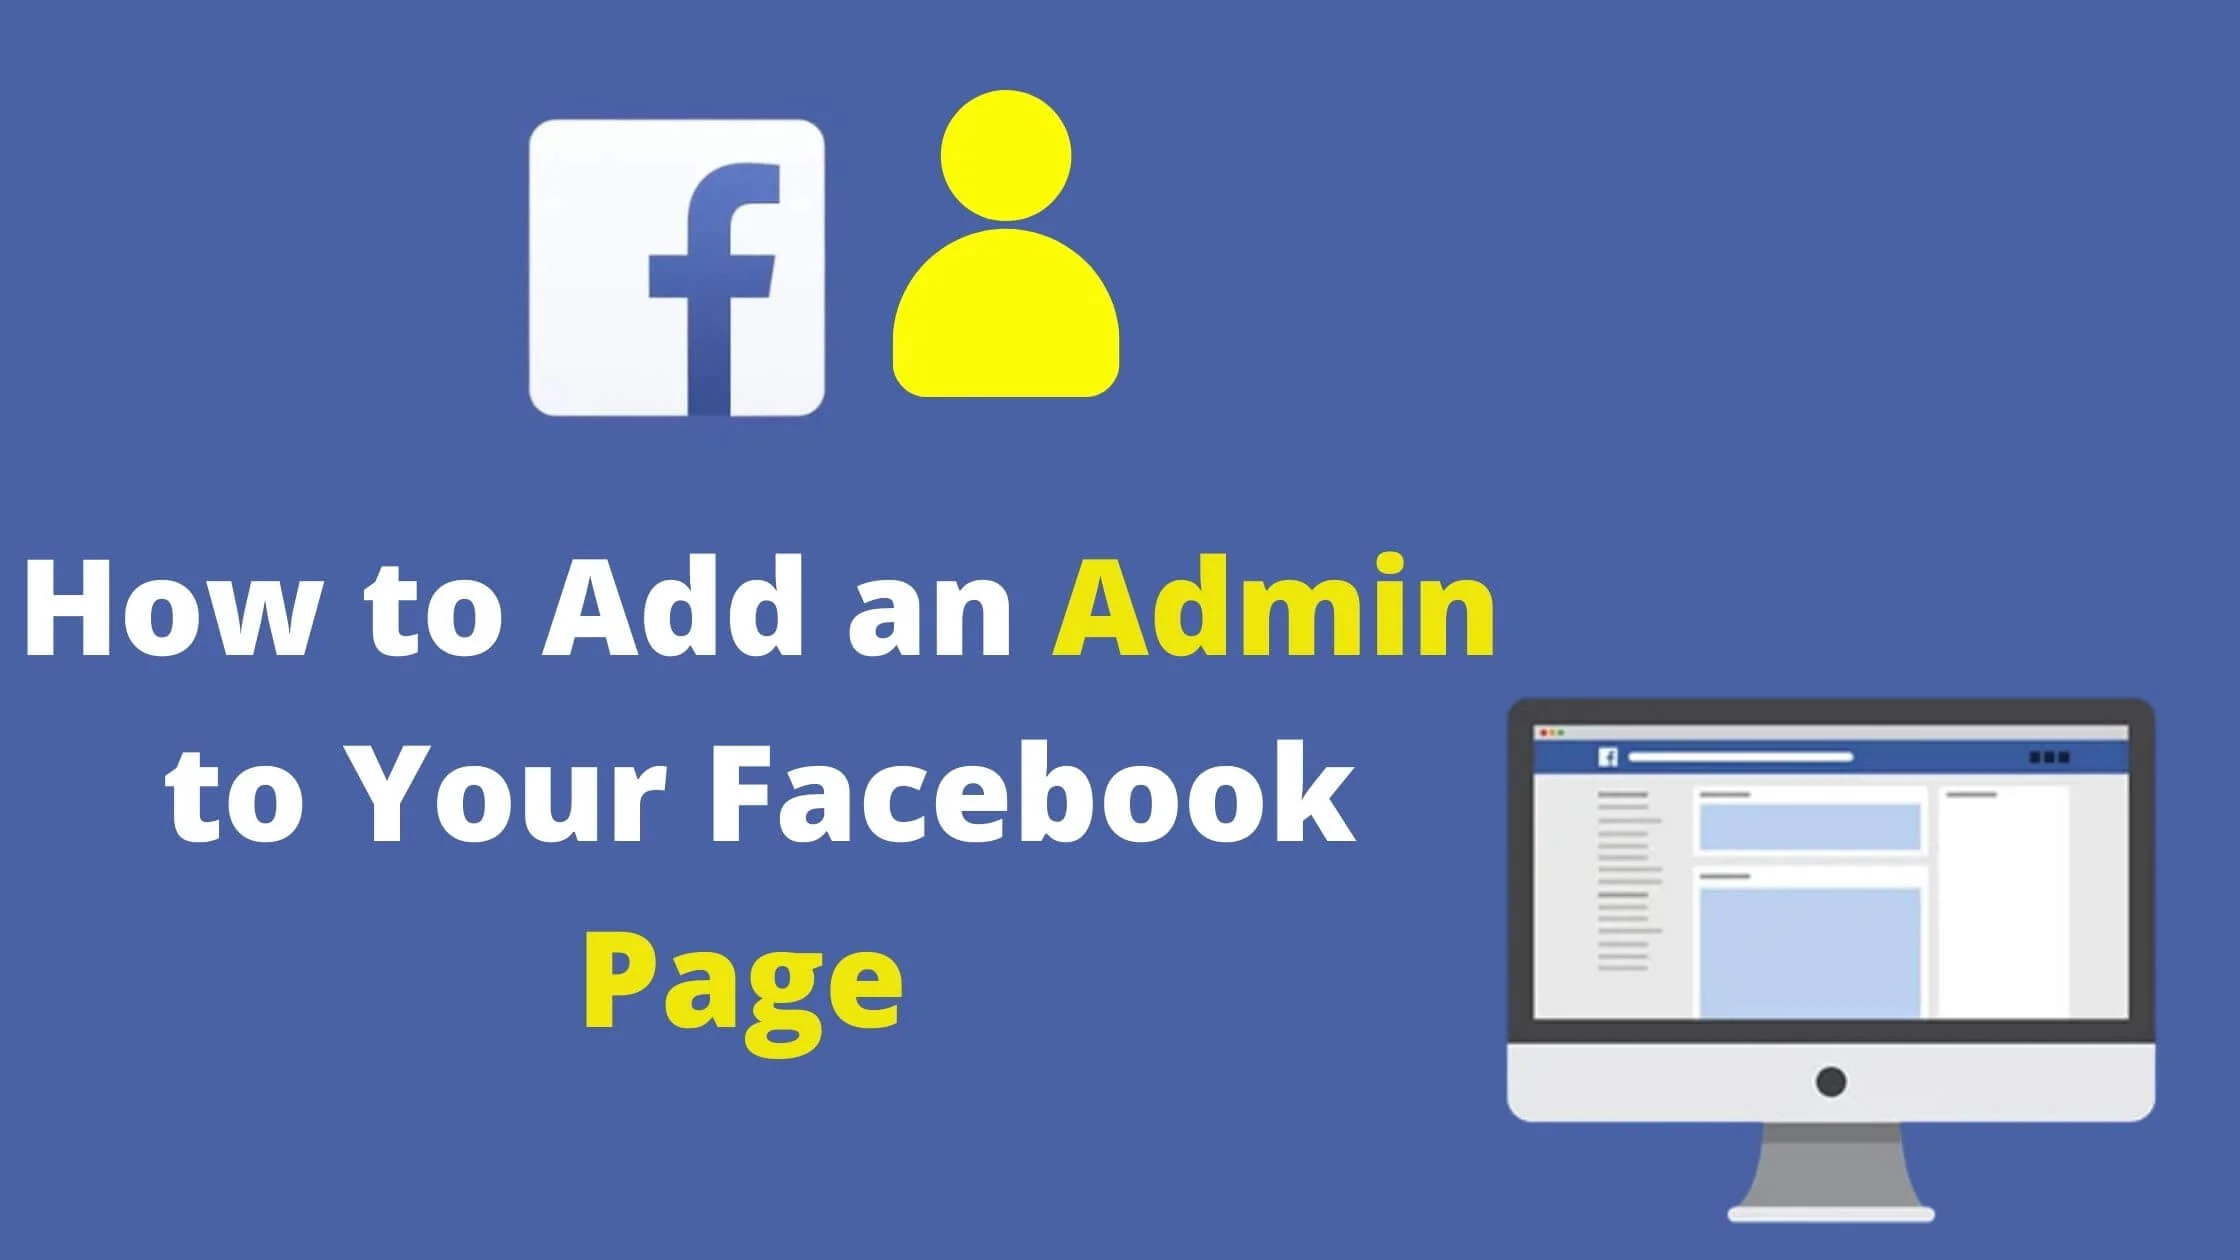 How to Add an Admin to Your Facebook Page